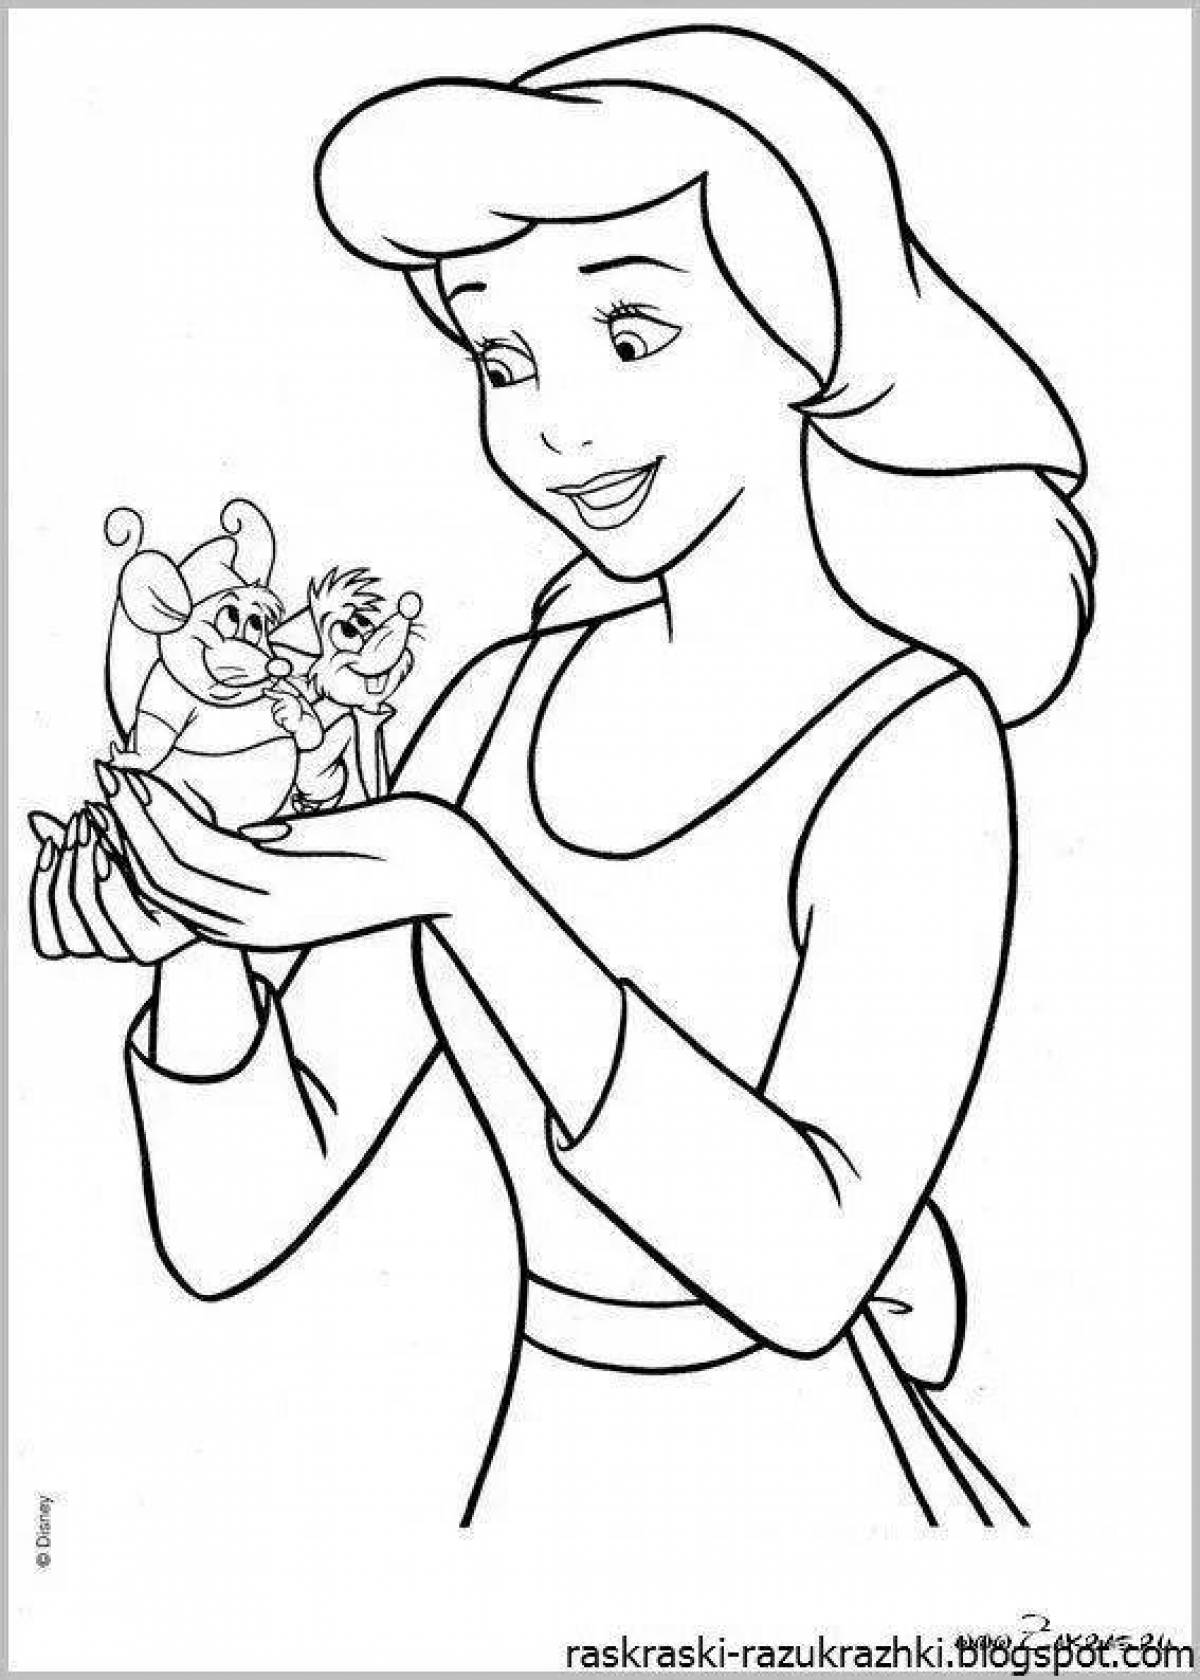 Great Cinderella coloring book for kids 5-6 years old